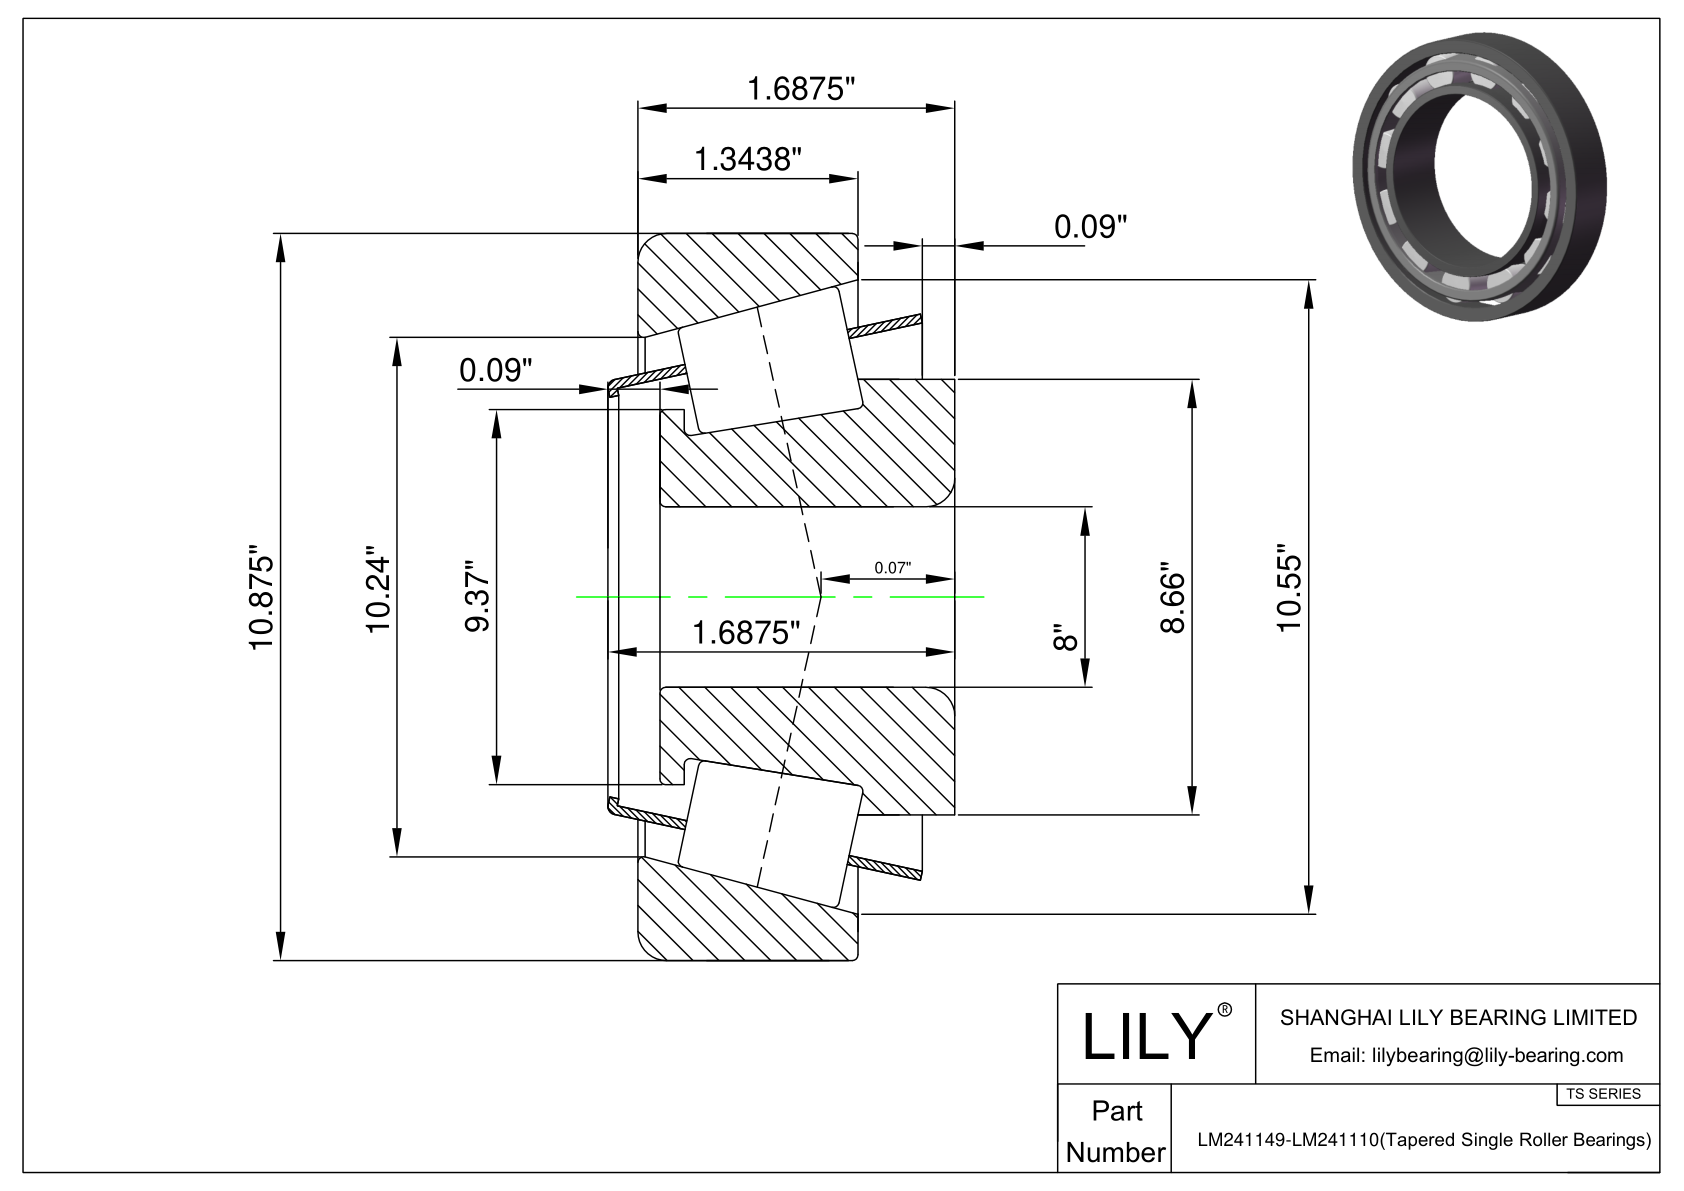 LM241149-LM241110 TS (Tapered Single Roller Bearings) (Imperial) cad drawing